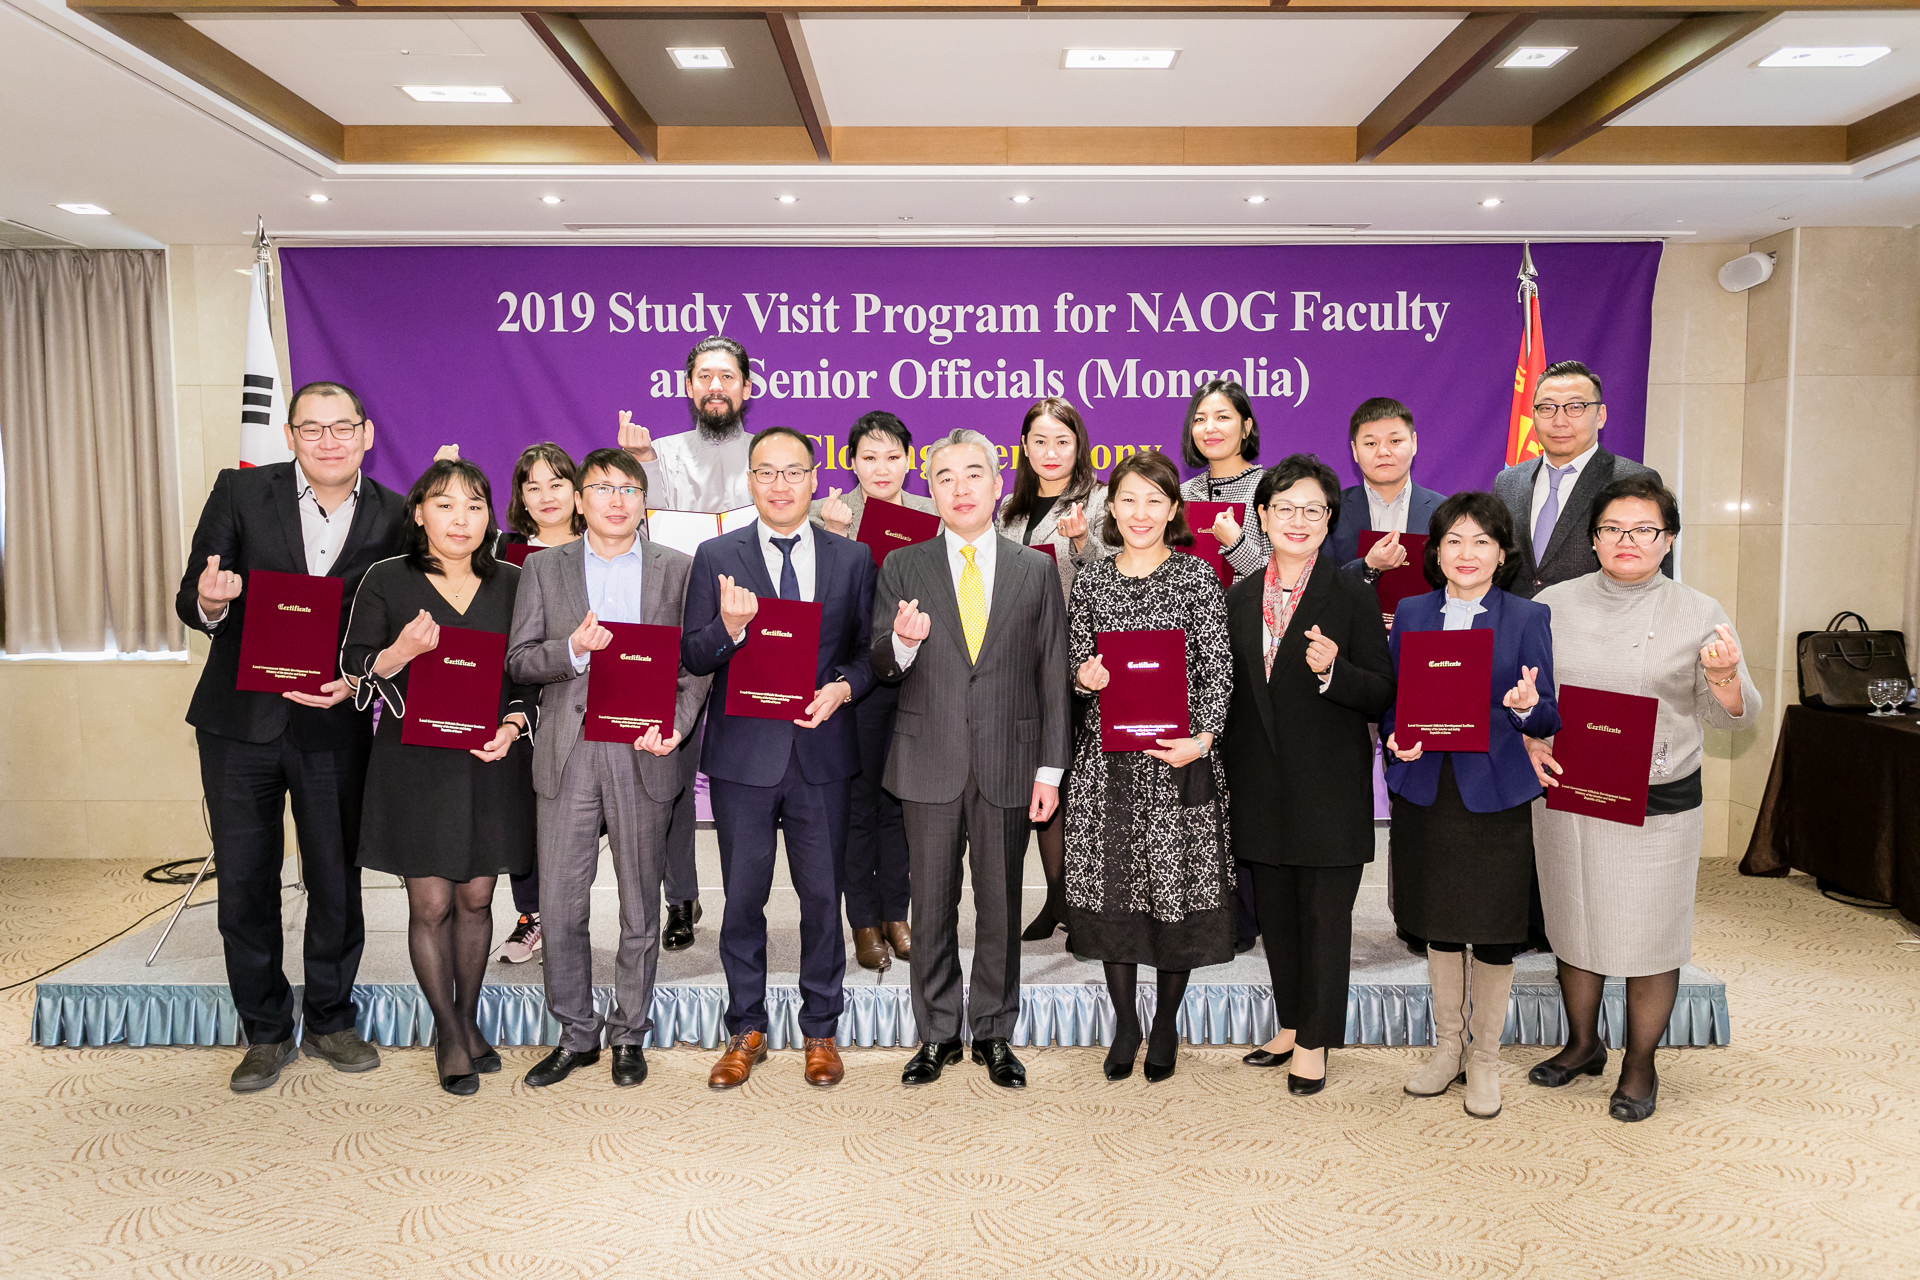 NAOG faculty and senior officials from Mongolia completes the customized program. 큰 이미지[마우스 클릭 시 창닫기]